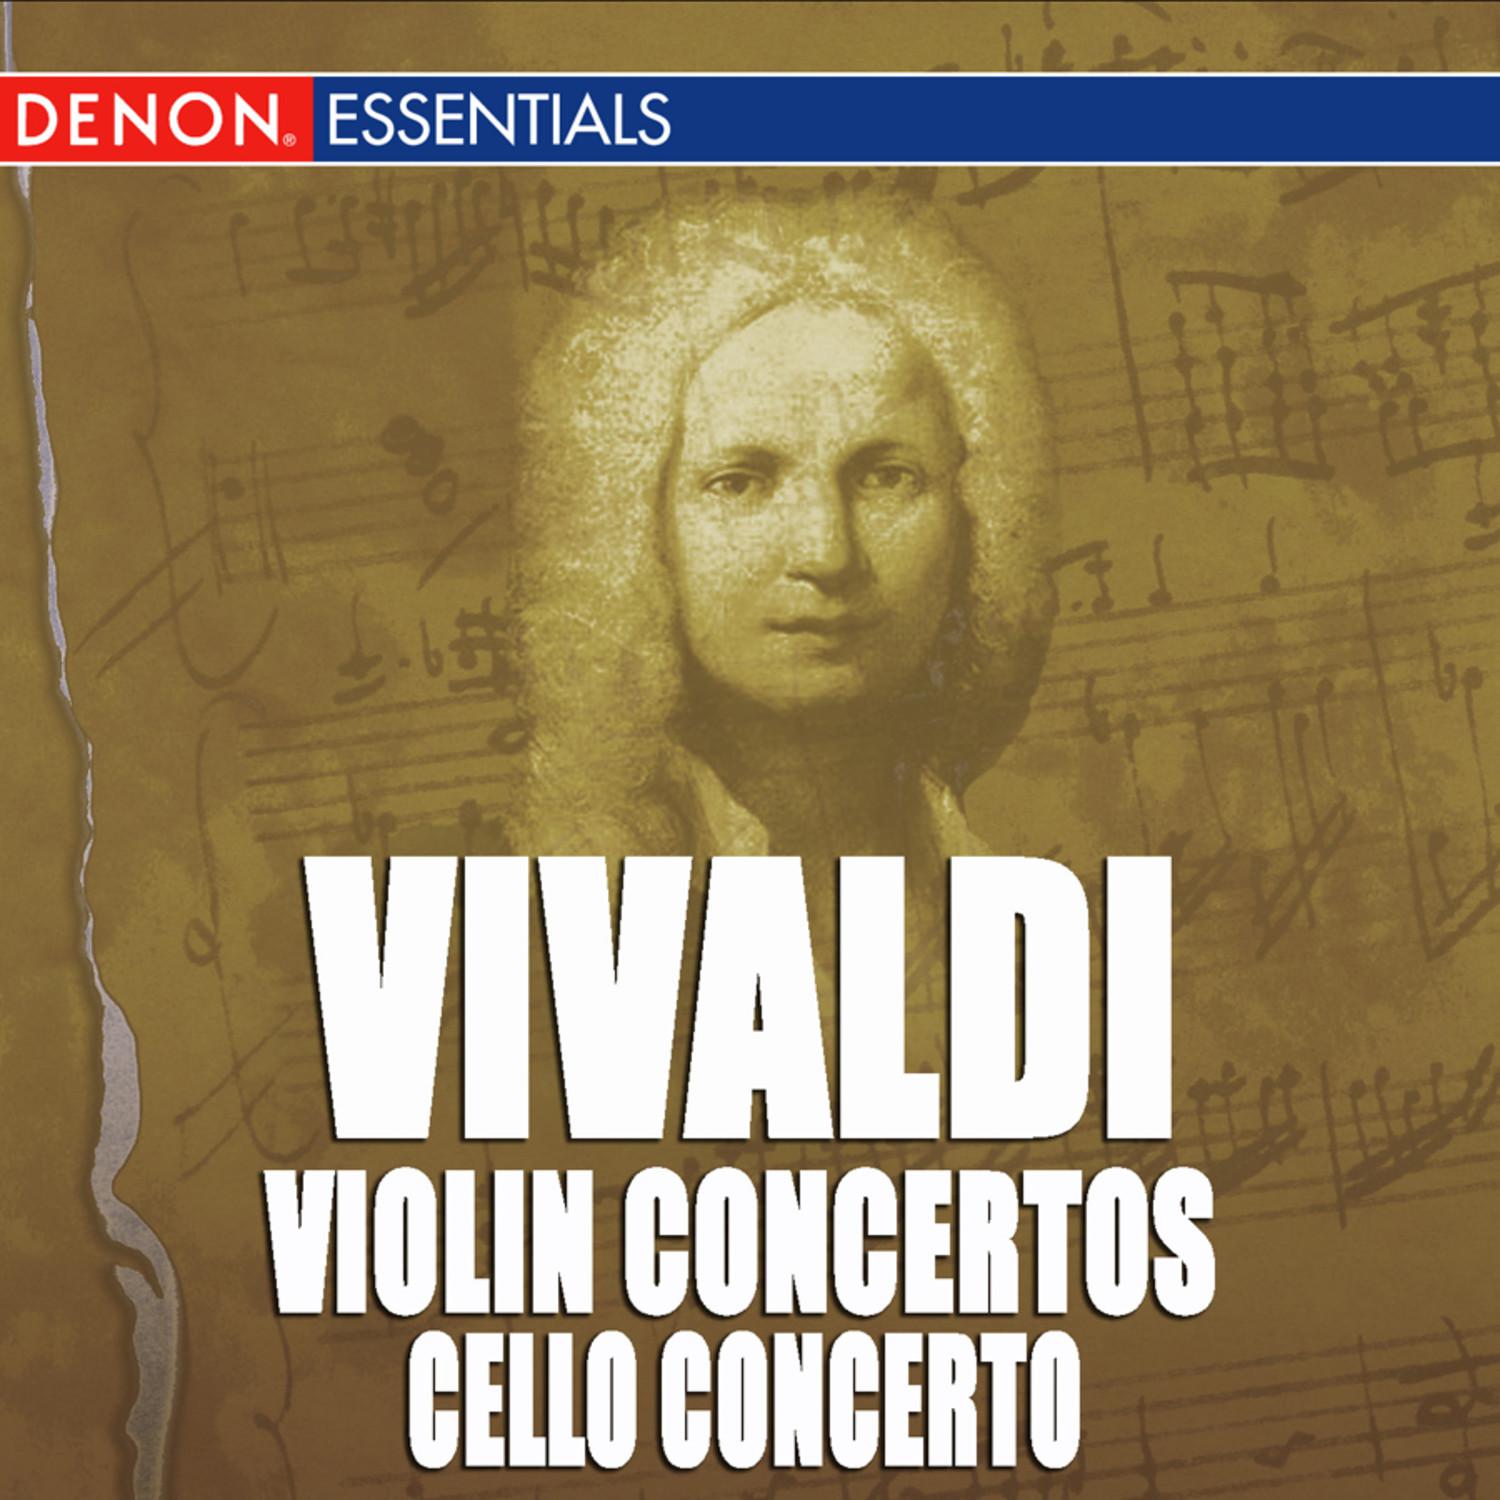 Concerto for 4 Violins, Cello, Strings and Bc No. 7 in F Major, Op. 3 RV 567: IV. Allegro